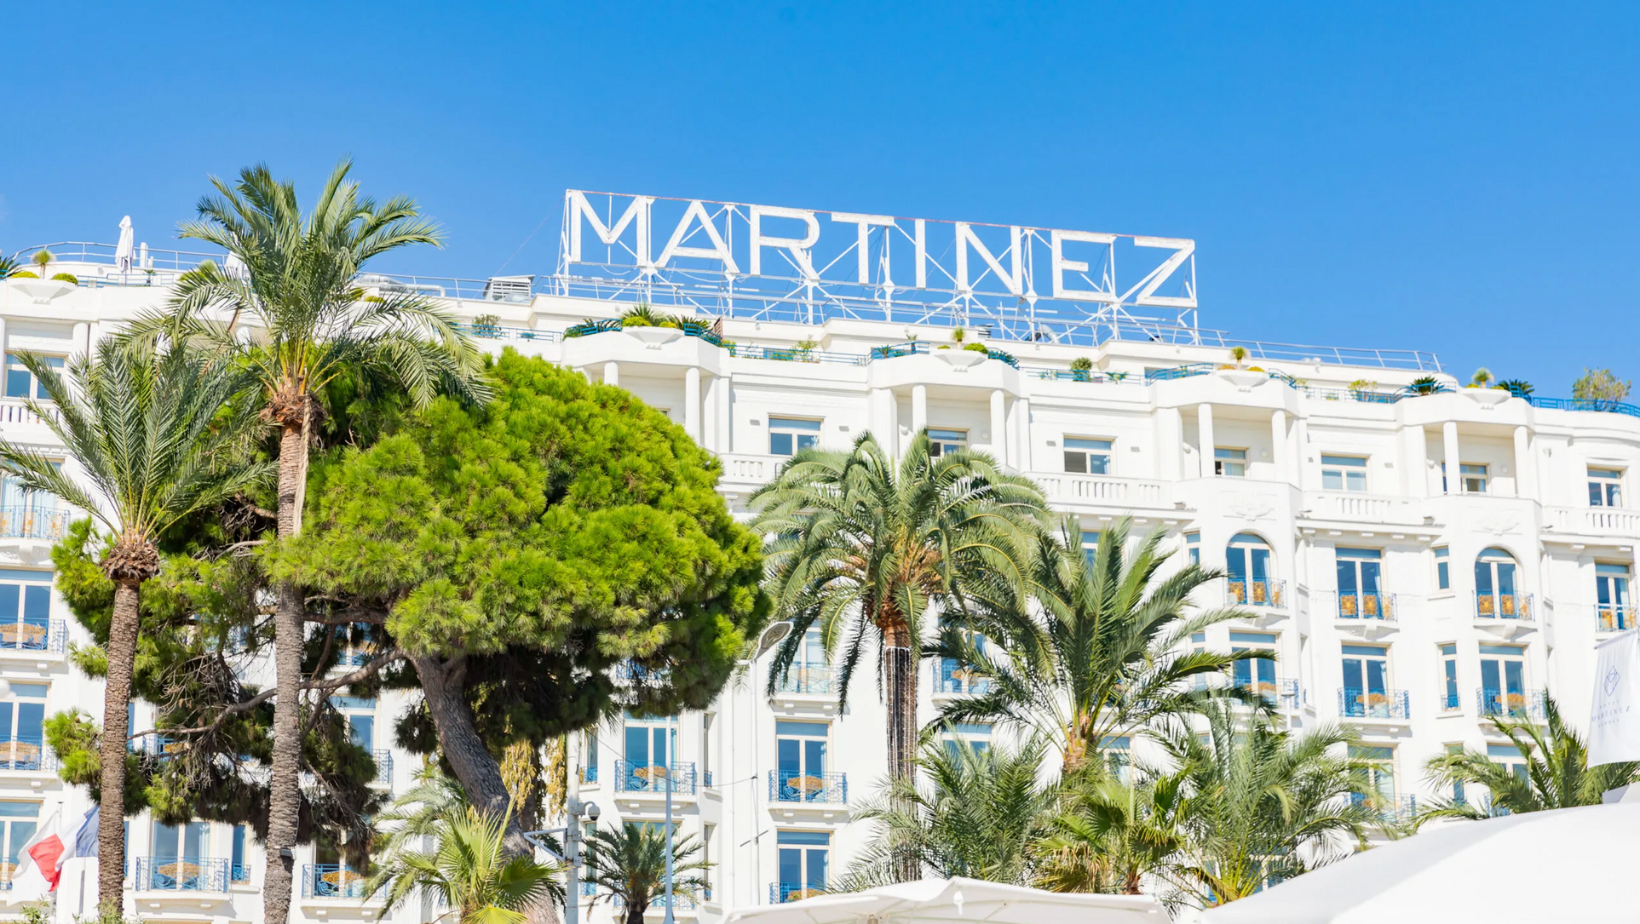 Histoires de Parfums at the Martinez Hotel for the Cannes Film Festival